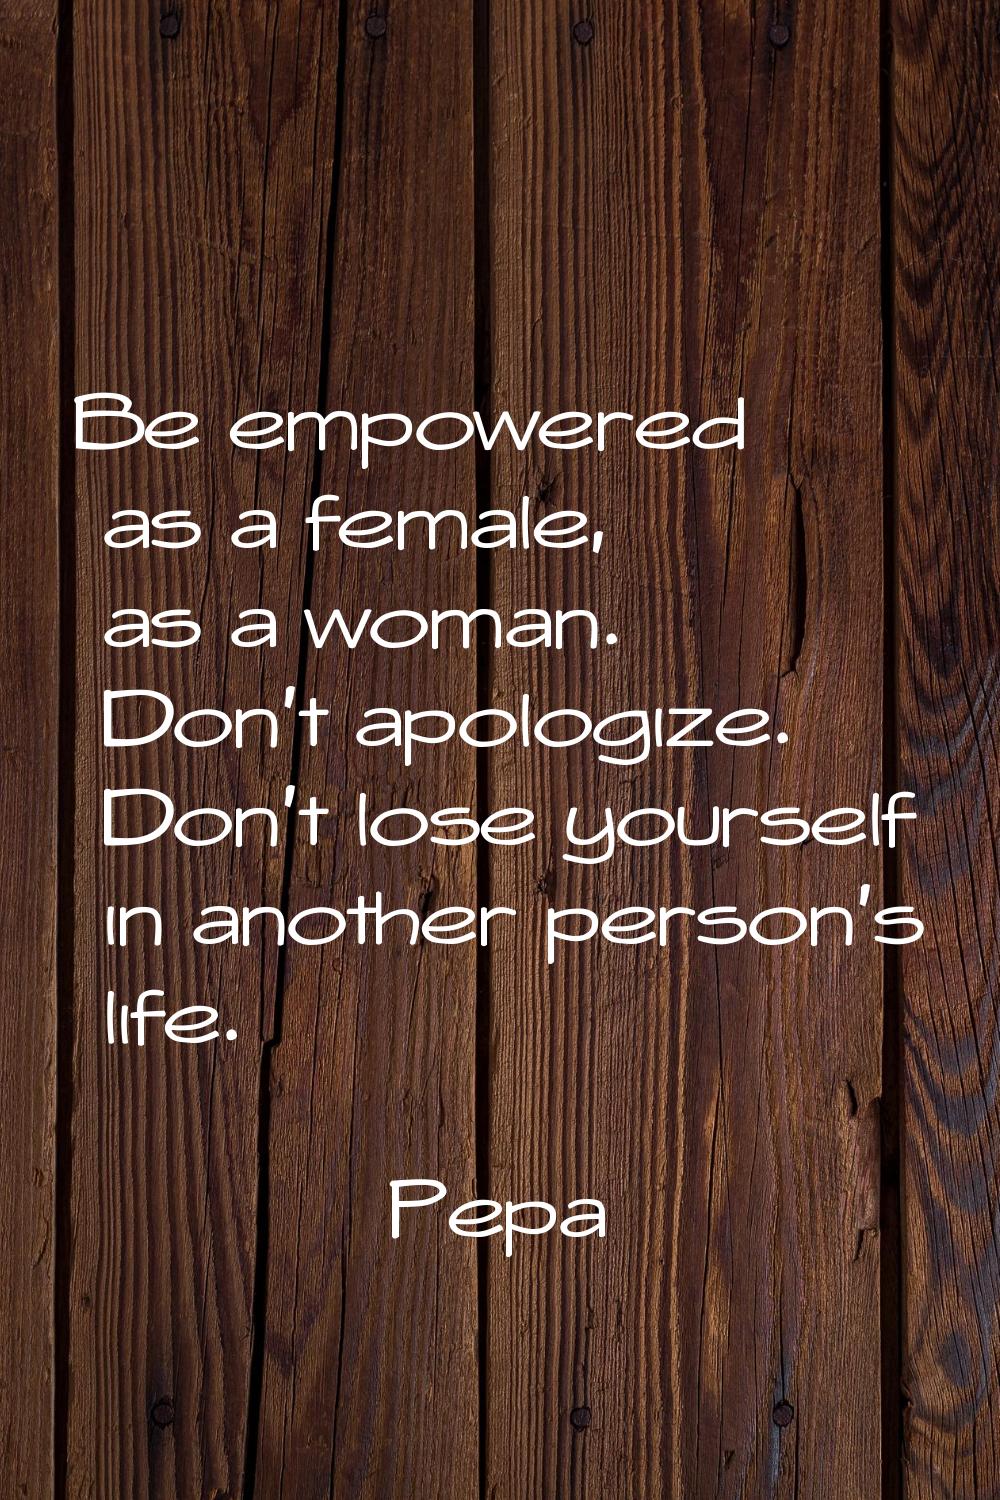 Be empowered as a female, as a woman. Don't apologize. Don't lose yourself in another person's life